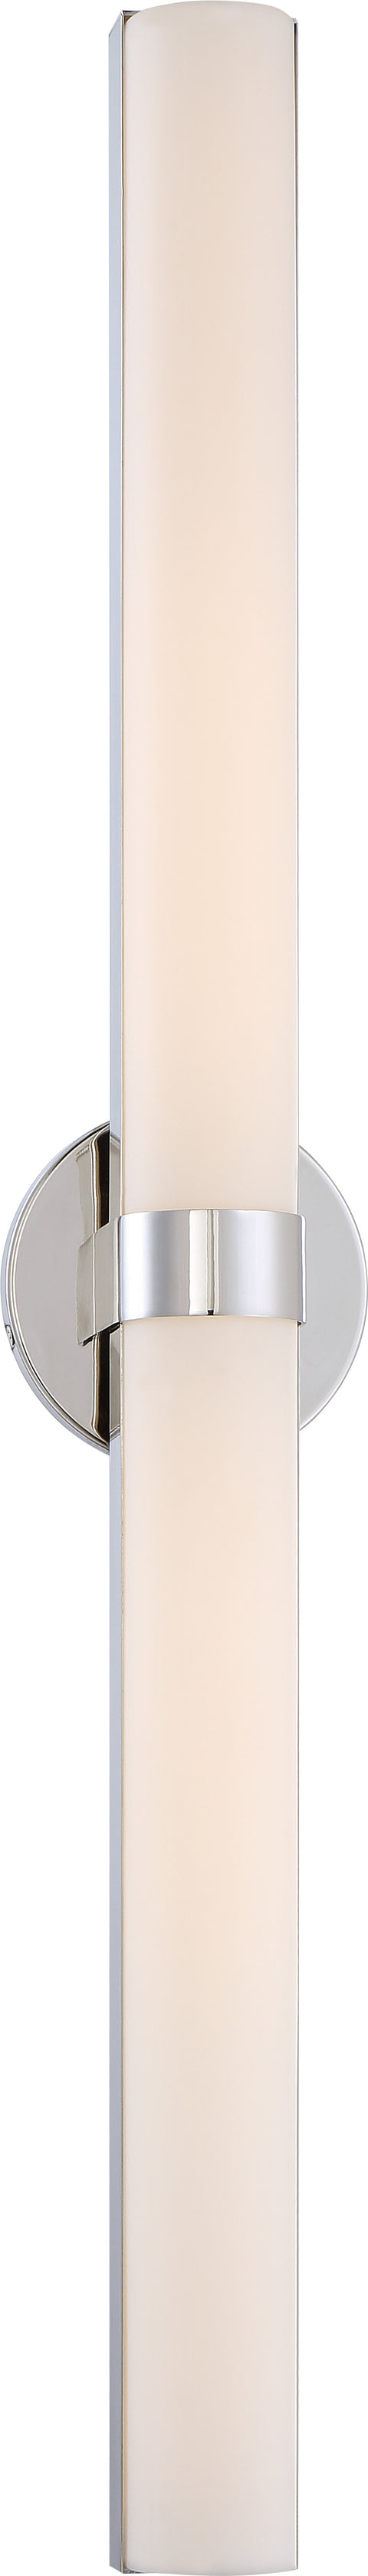 Nuvo Lighting 62/724 Bond Double 37 3/8 Inch LED Vanity with White Acrylic Lens